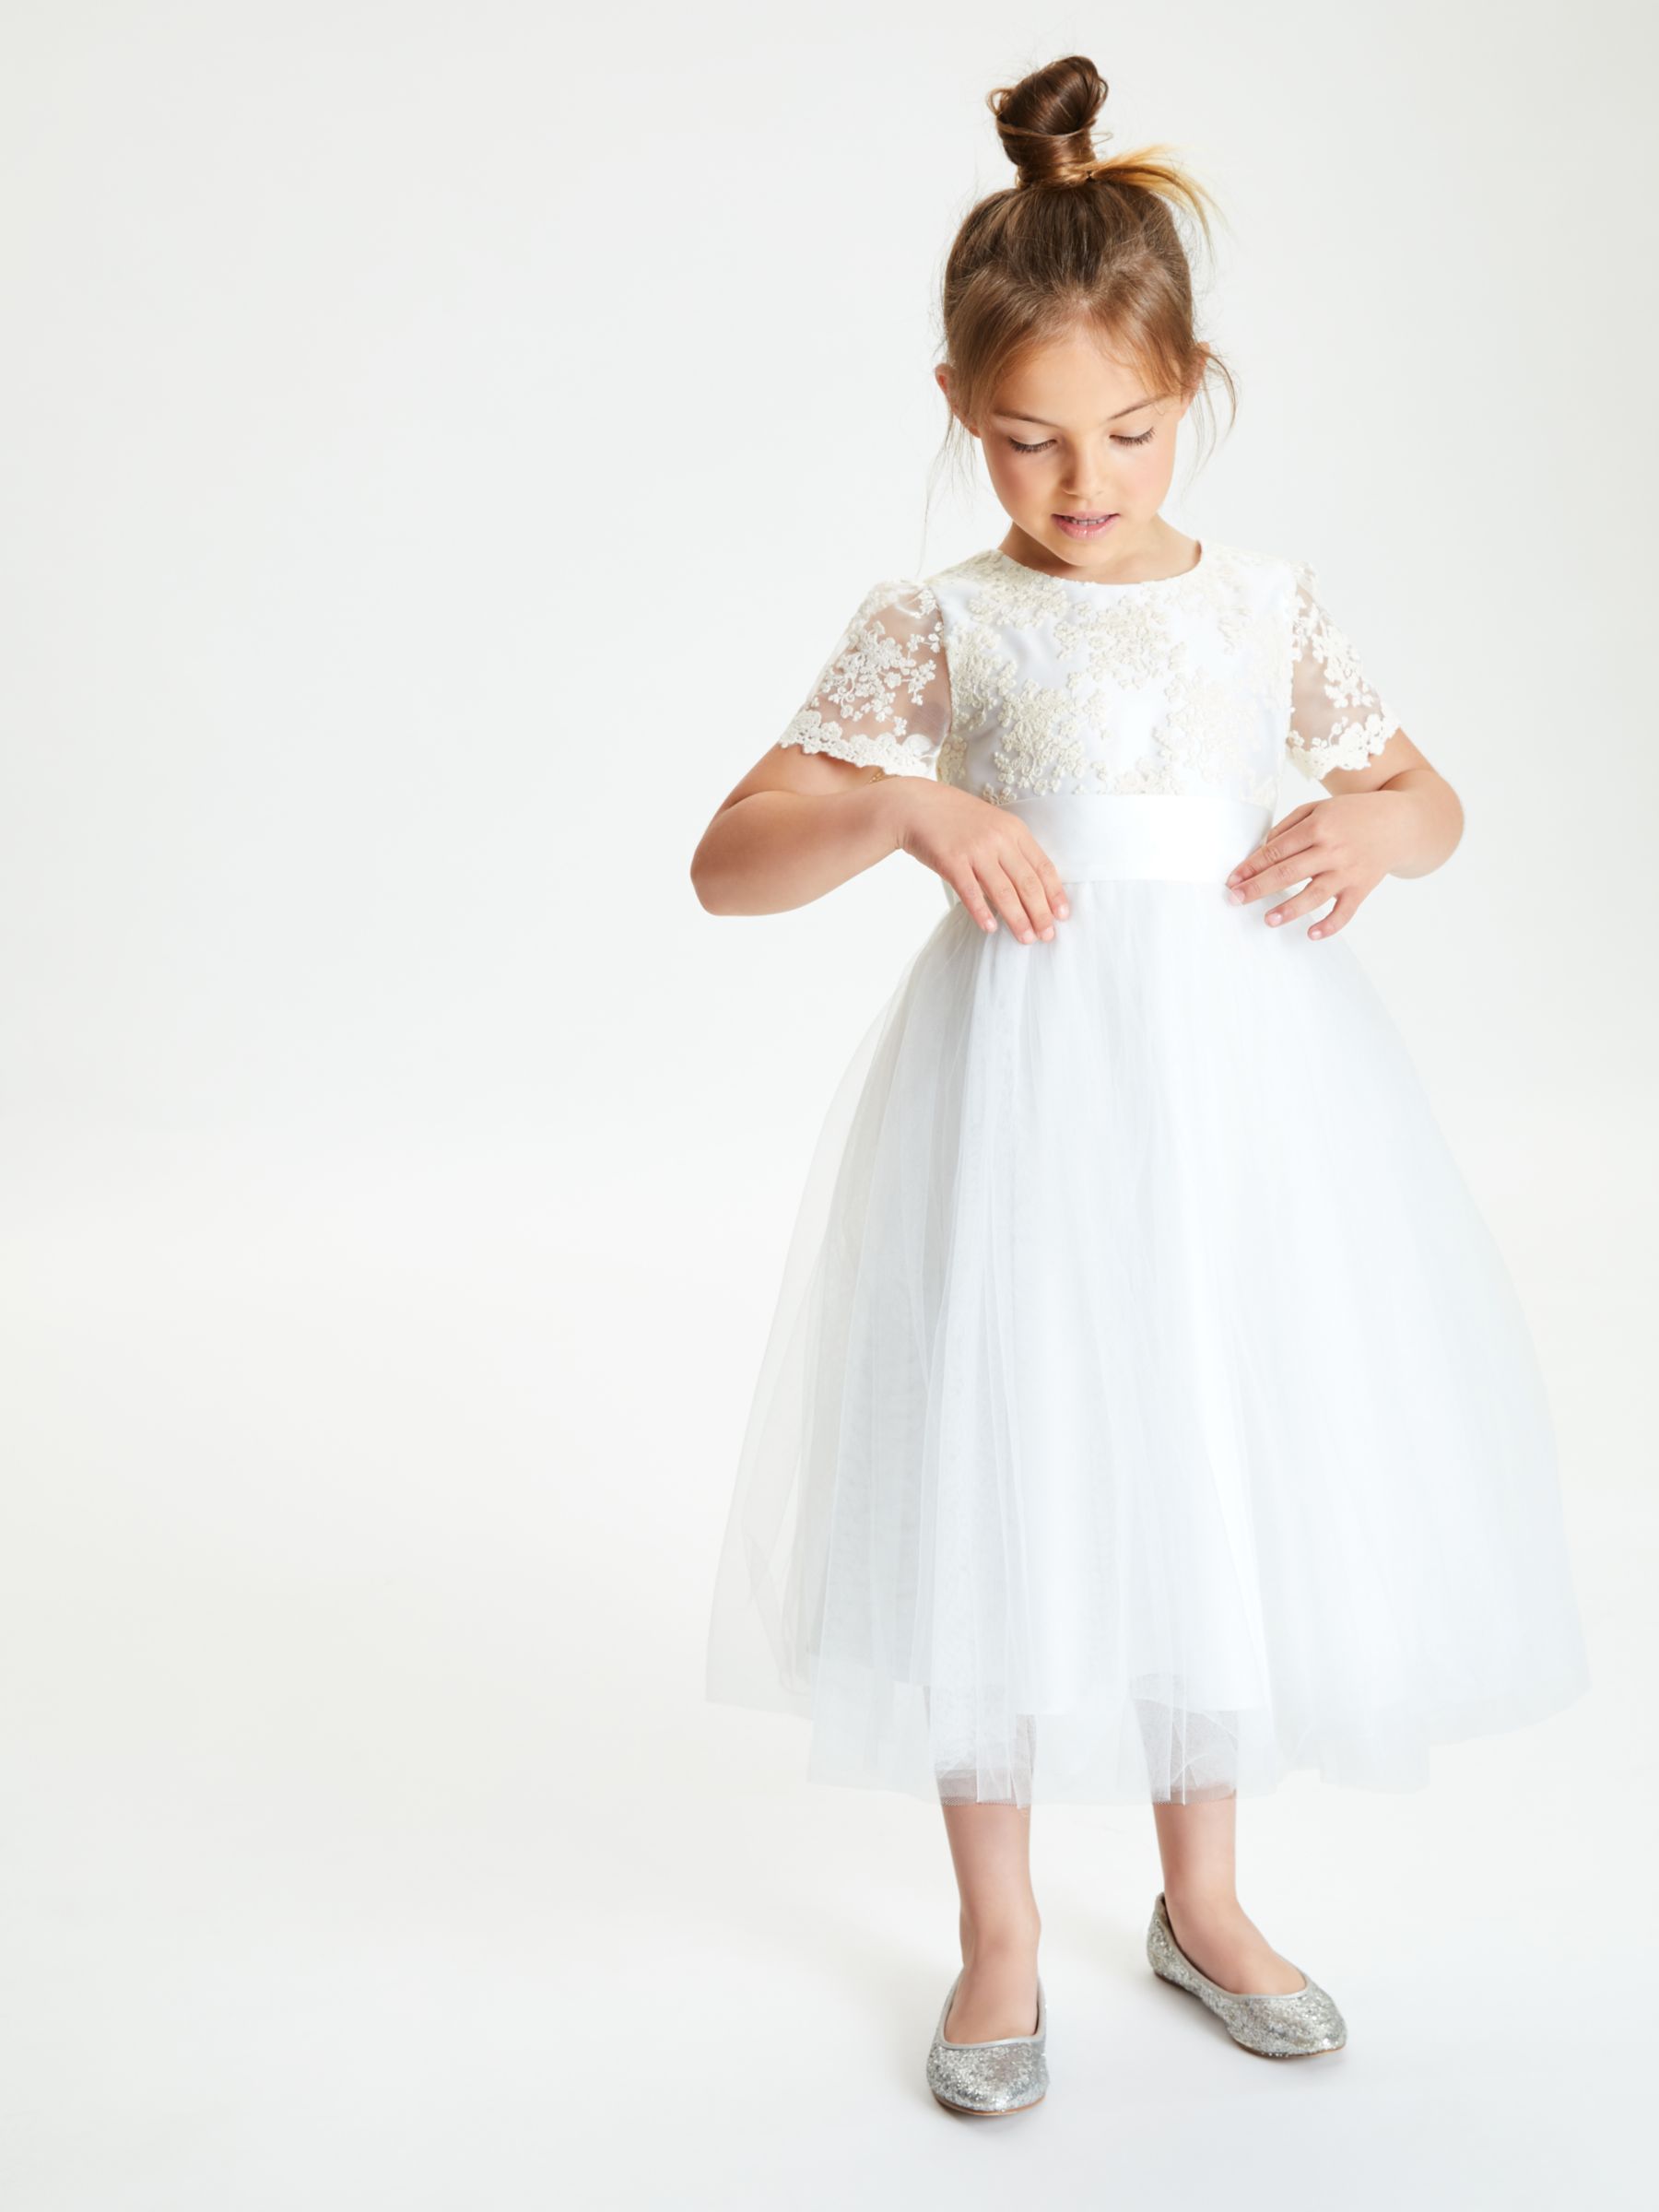 bridesmaid dresses for babies